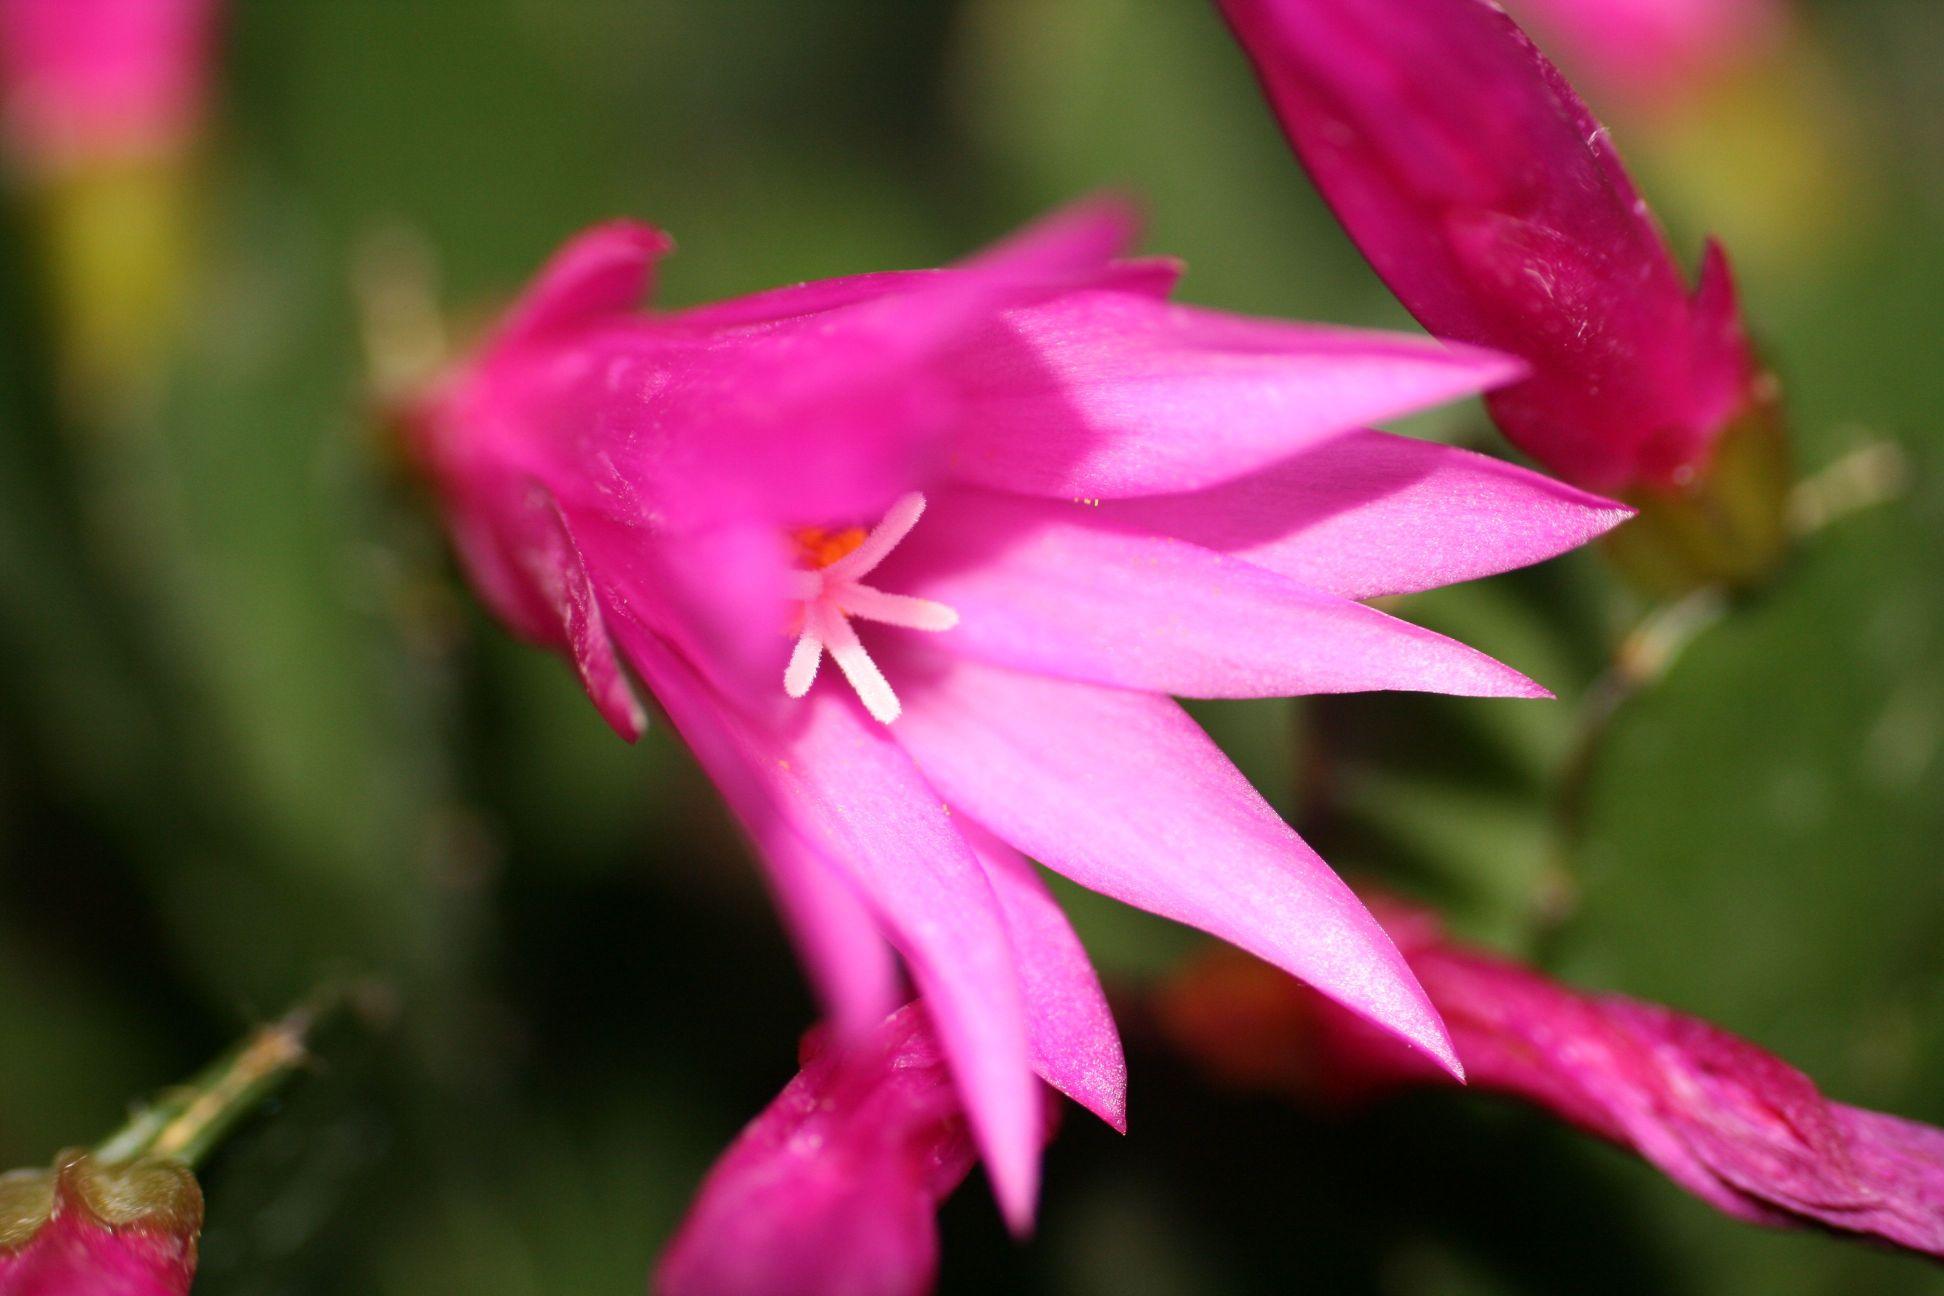 magenta-pink flowers with white stigmas and green leaves